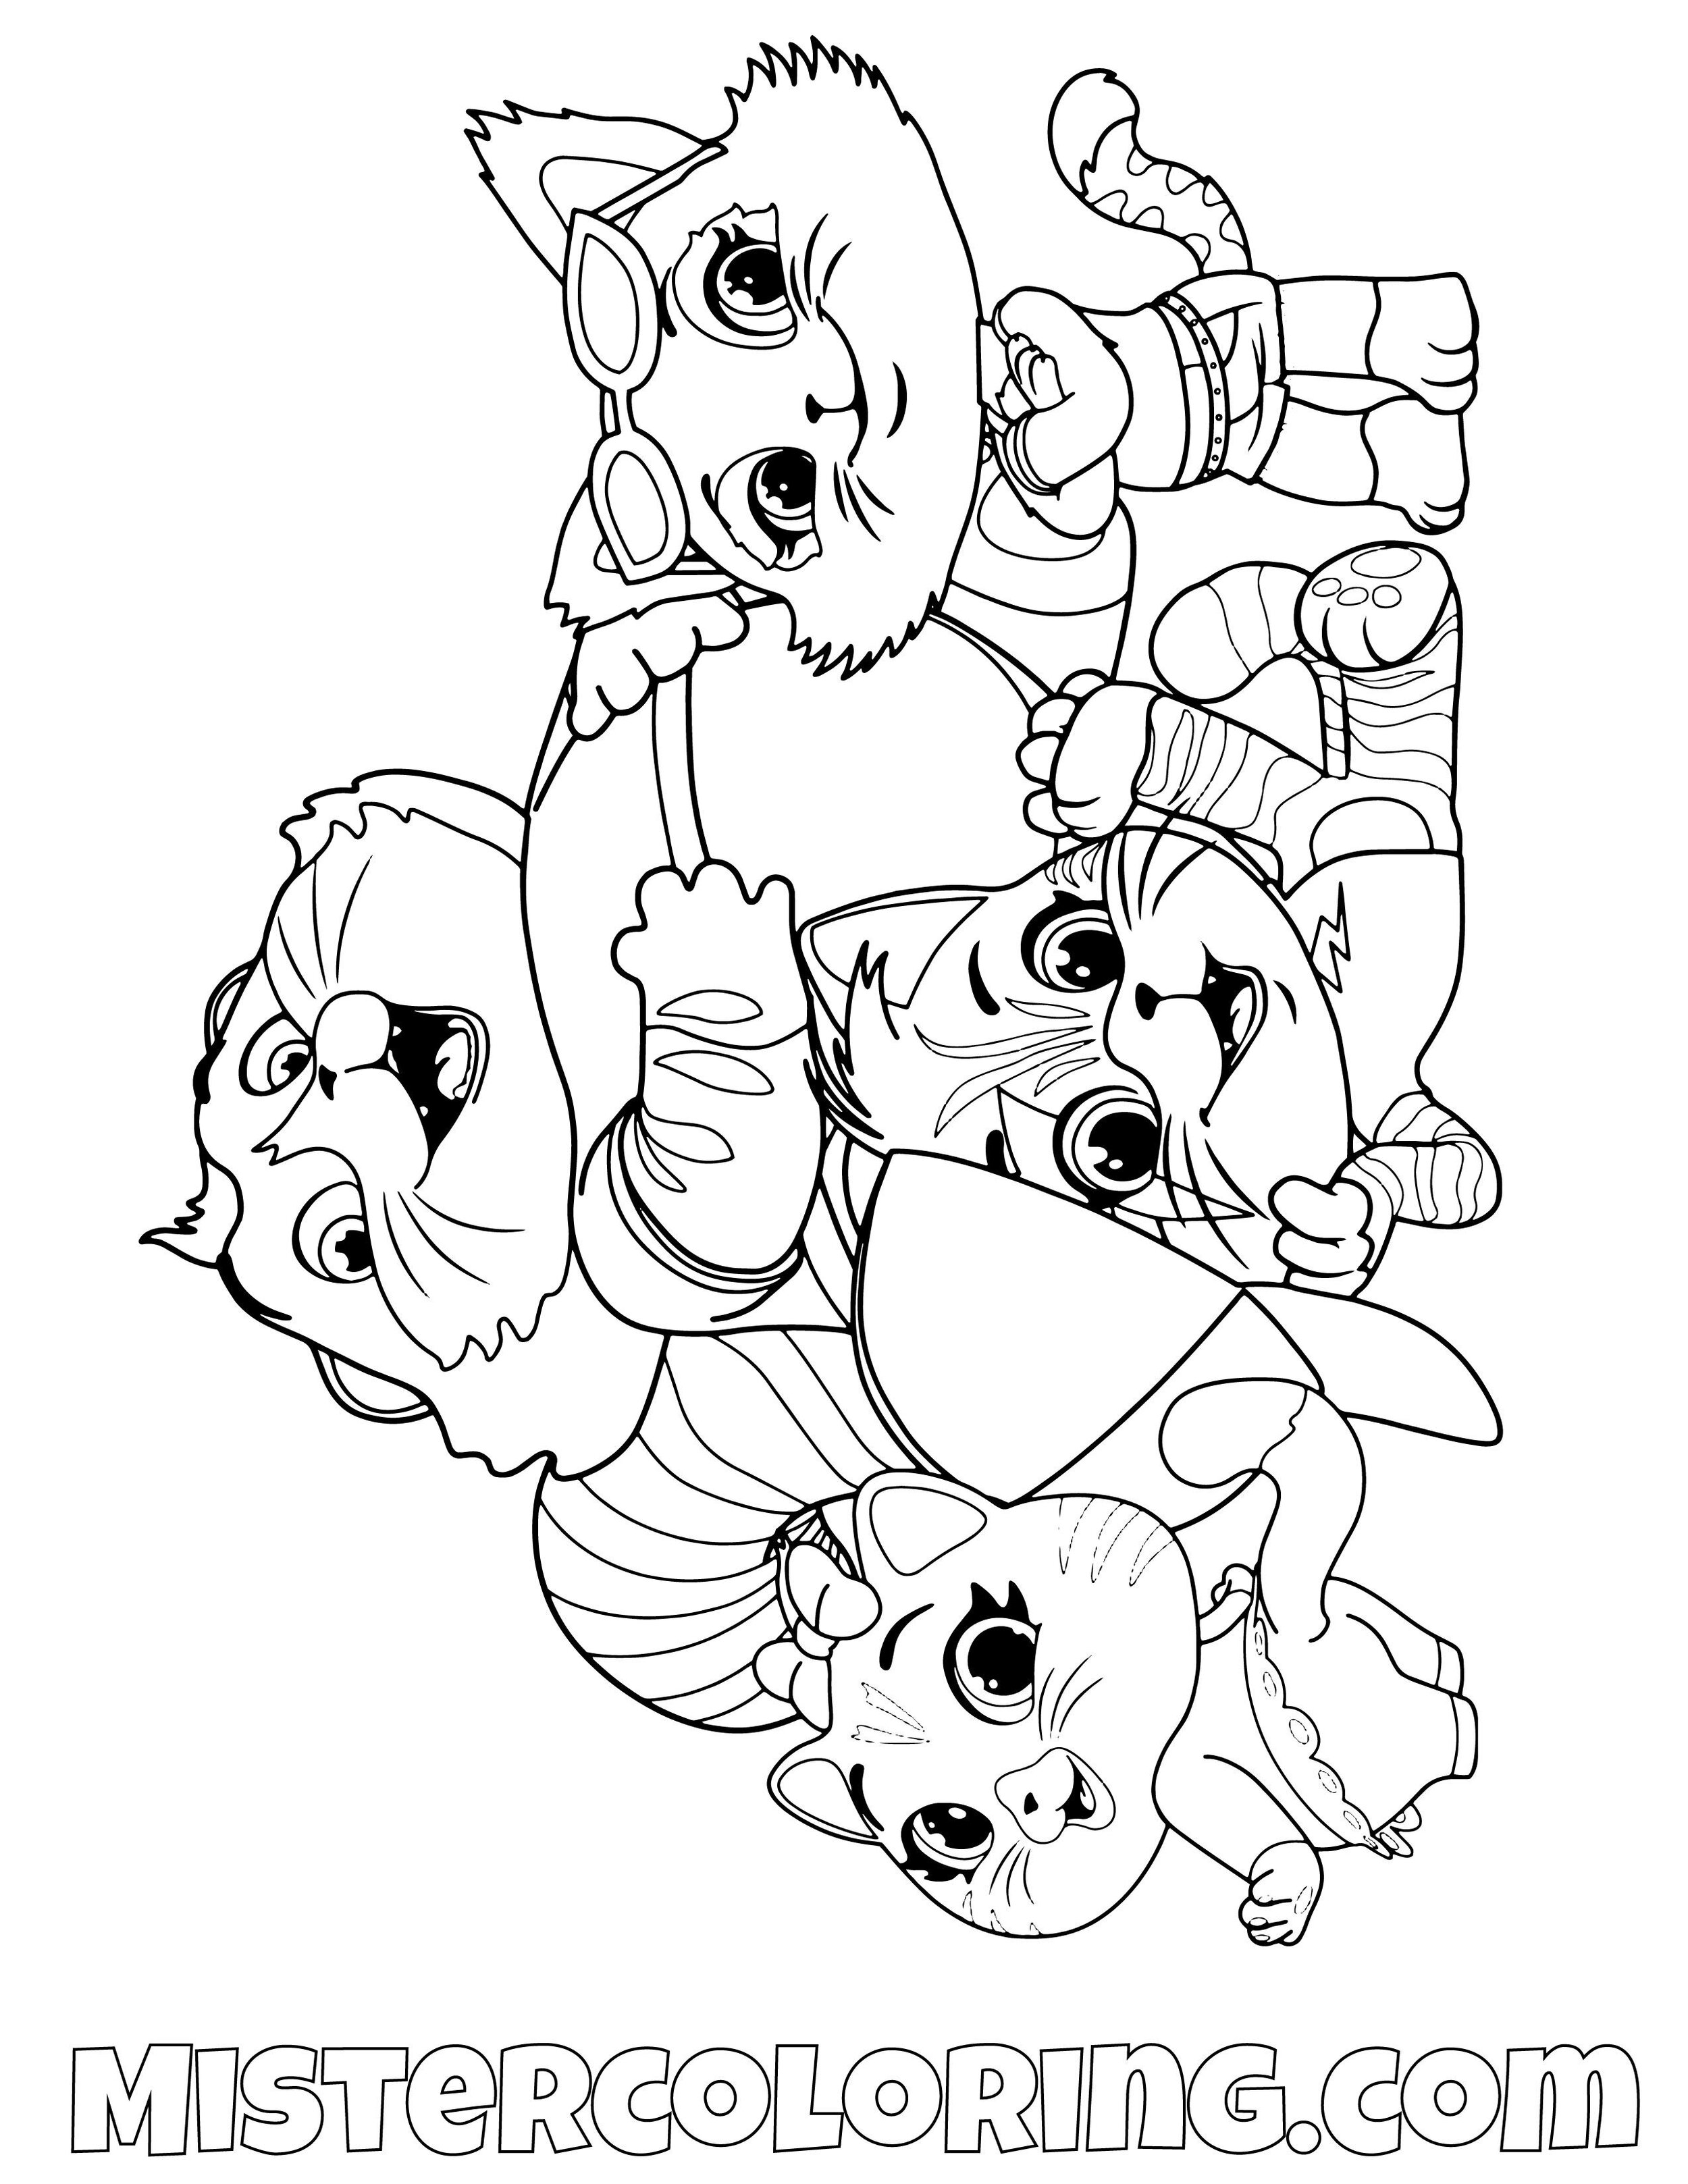 44 Cats Coloring Pages For Kidis Mister Coloring